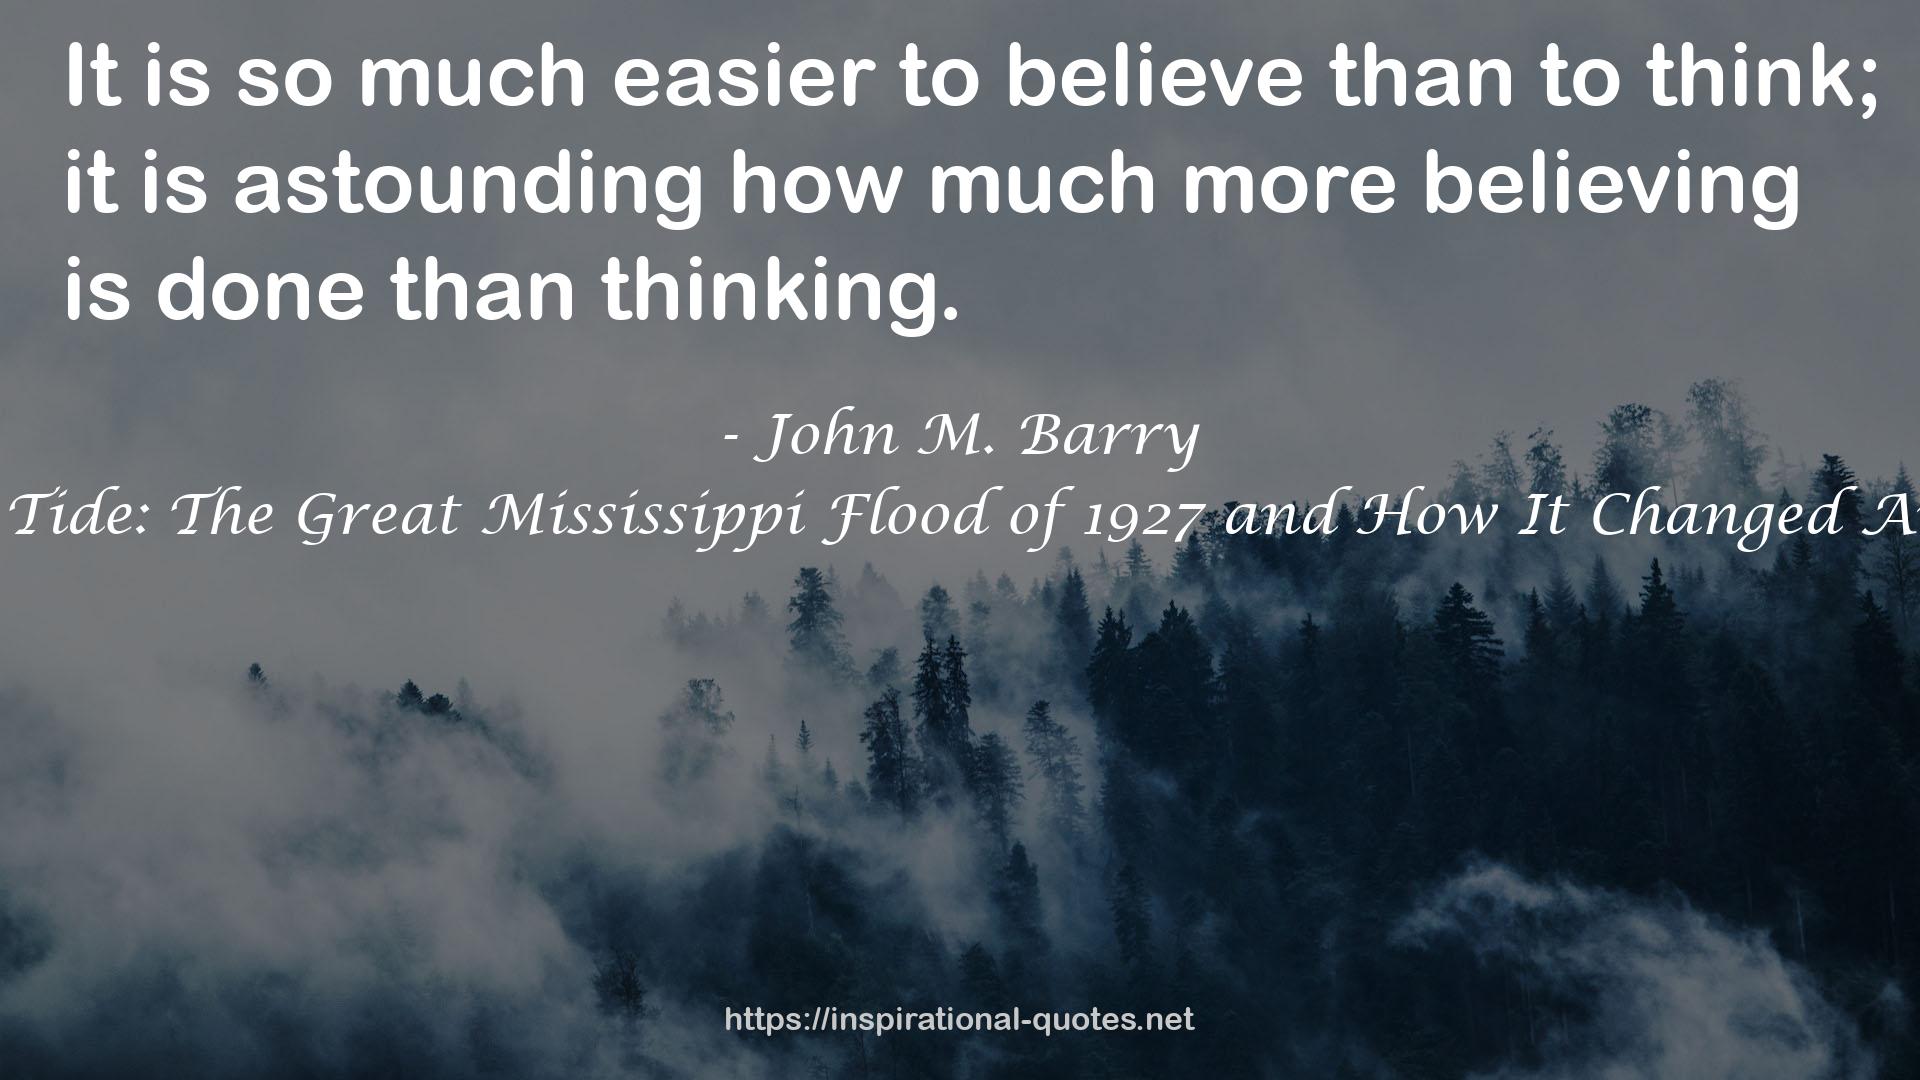 Rising Tide: The Great Mississippi Flood of 1927 and How It Changed America QUOTES